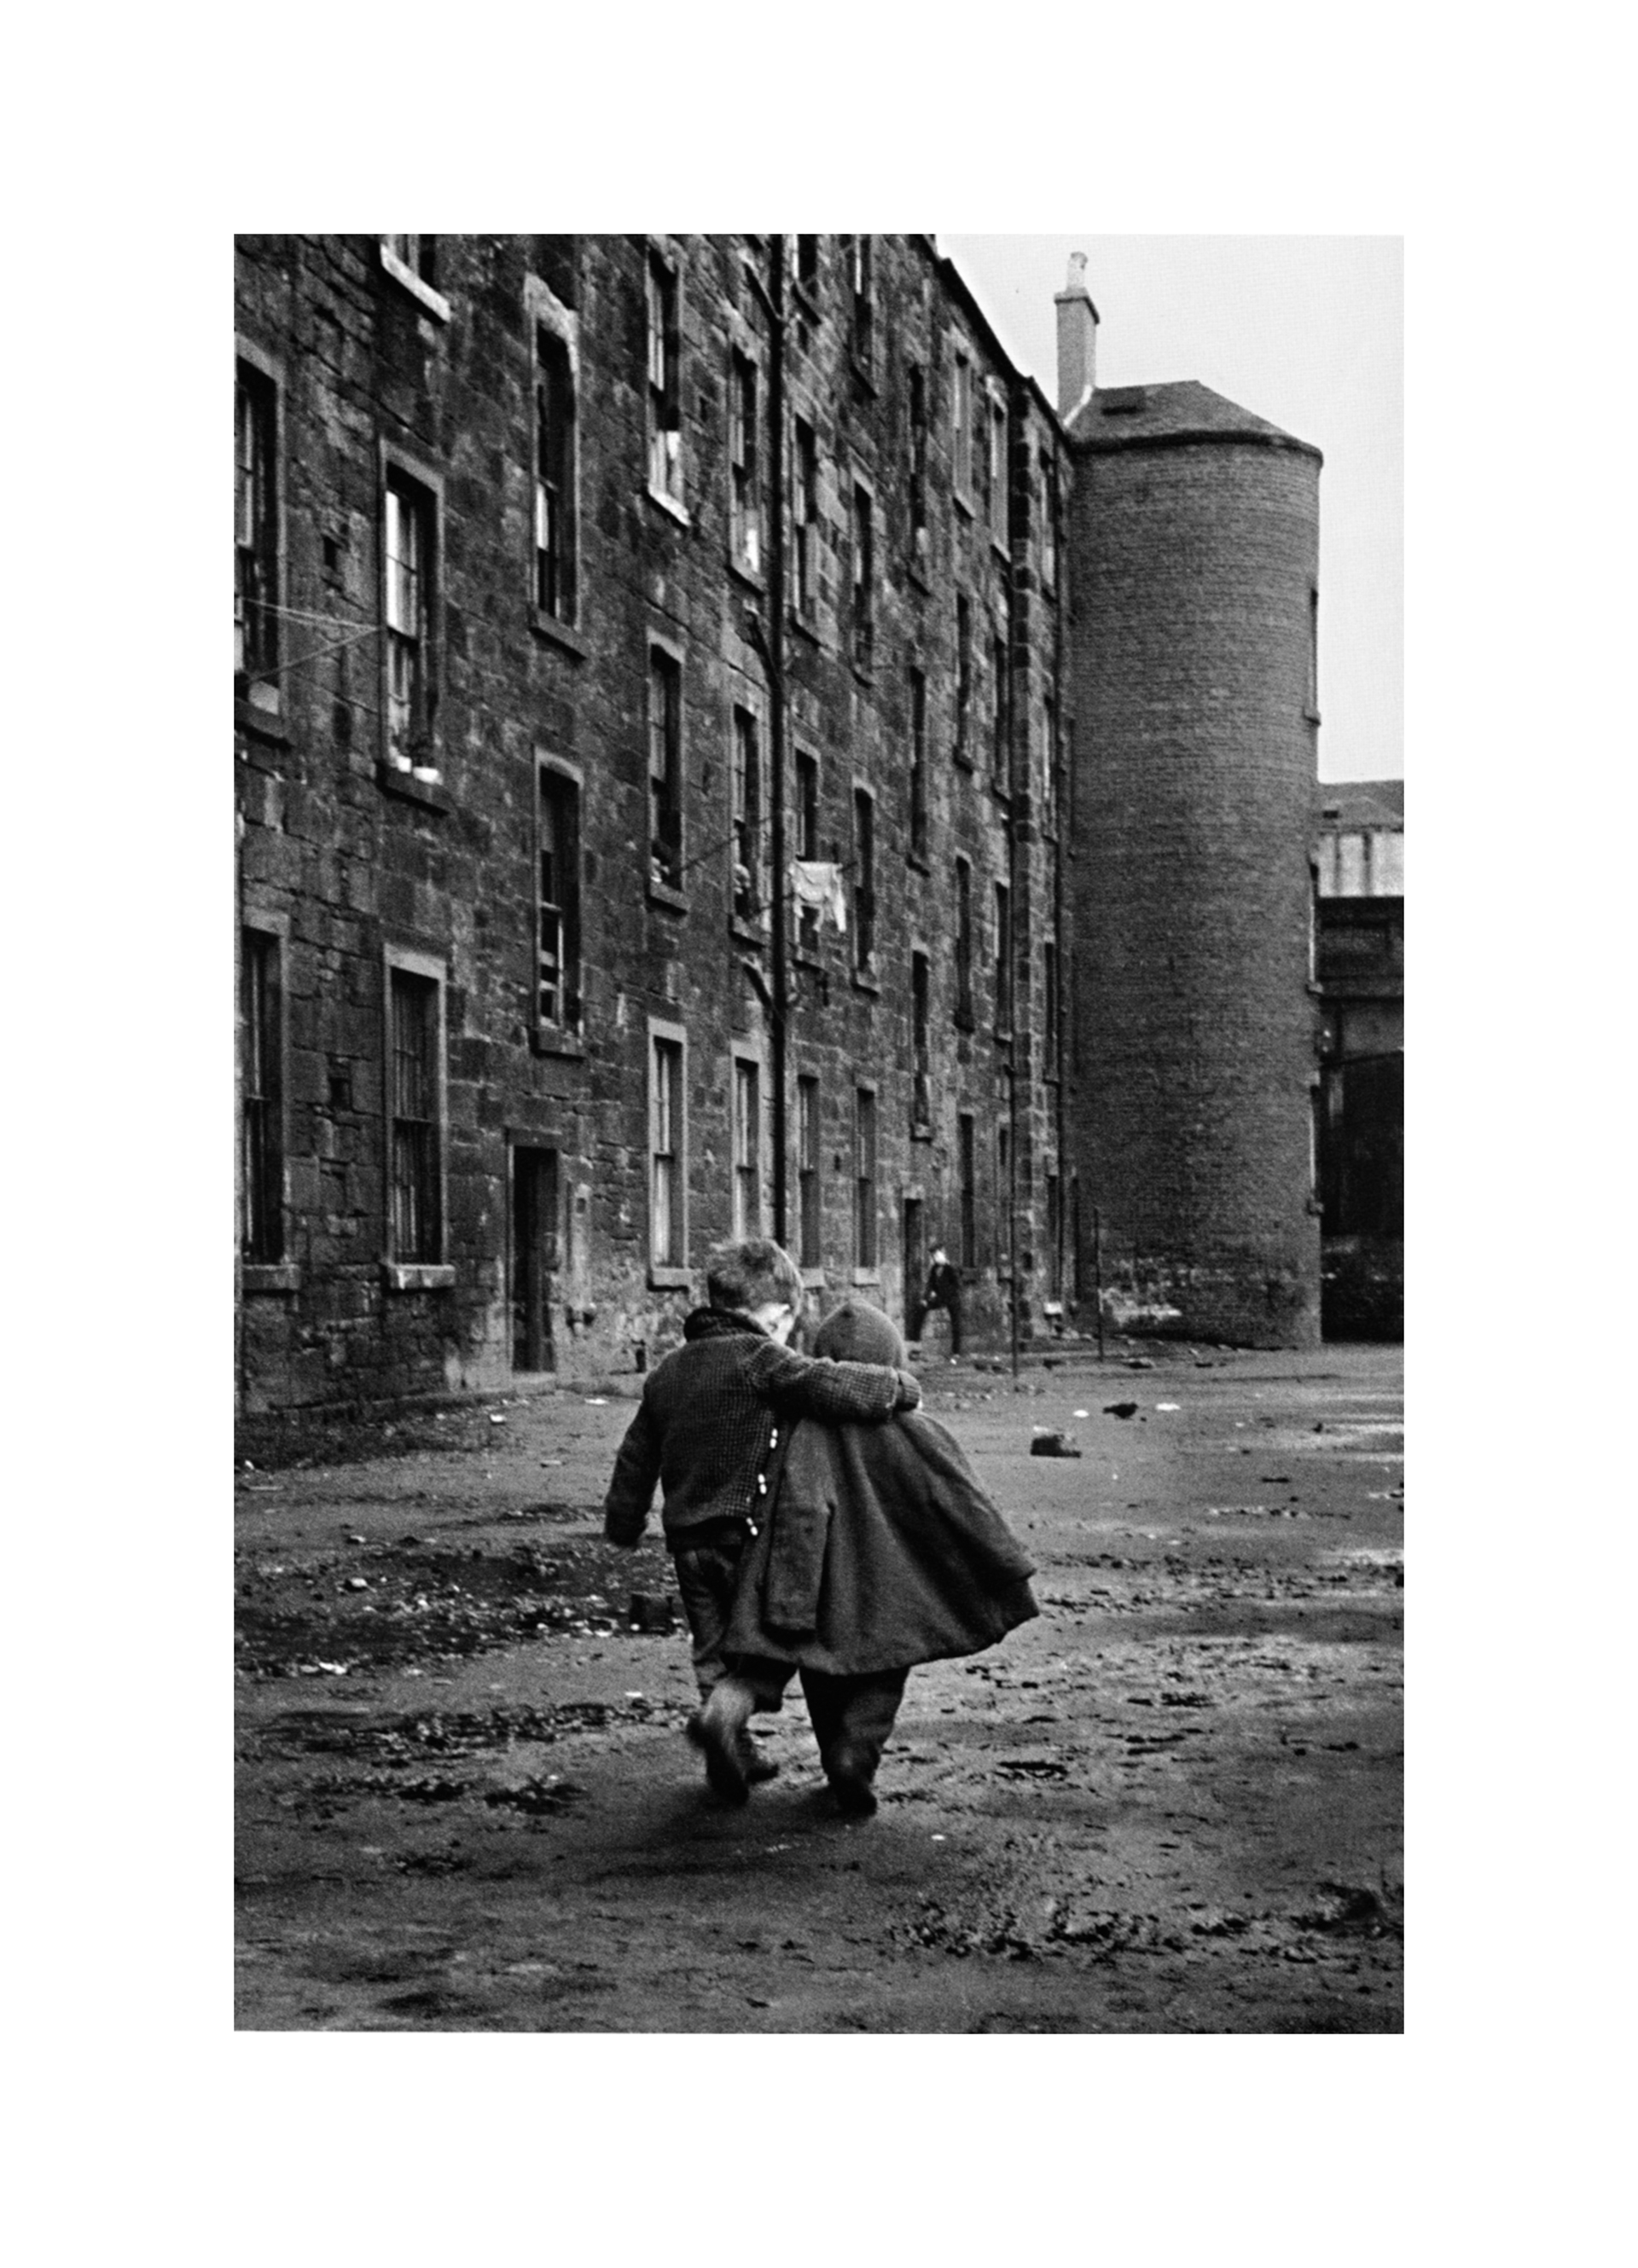 Image of A Comforting Arm, Glasgow 1968 by David Peat